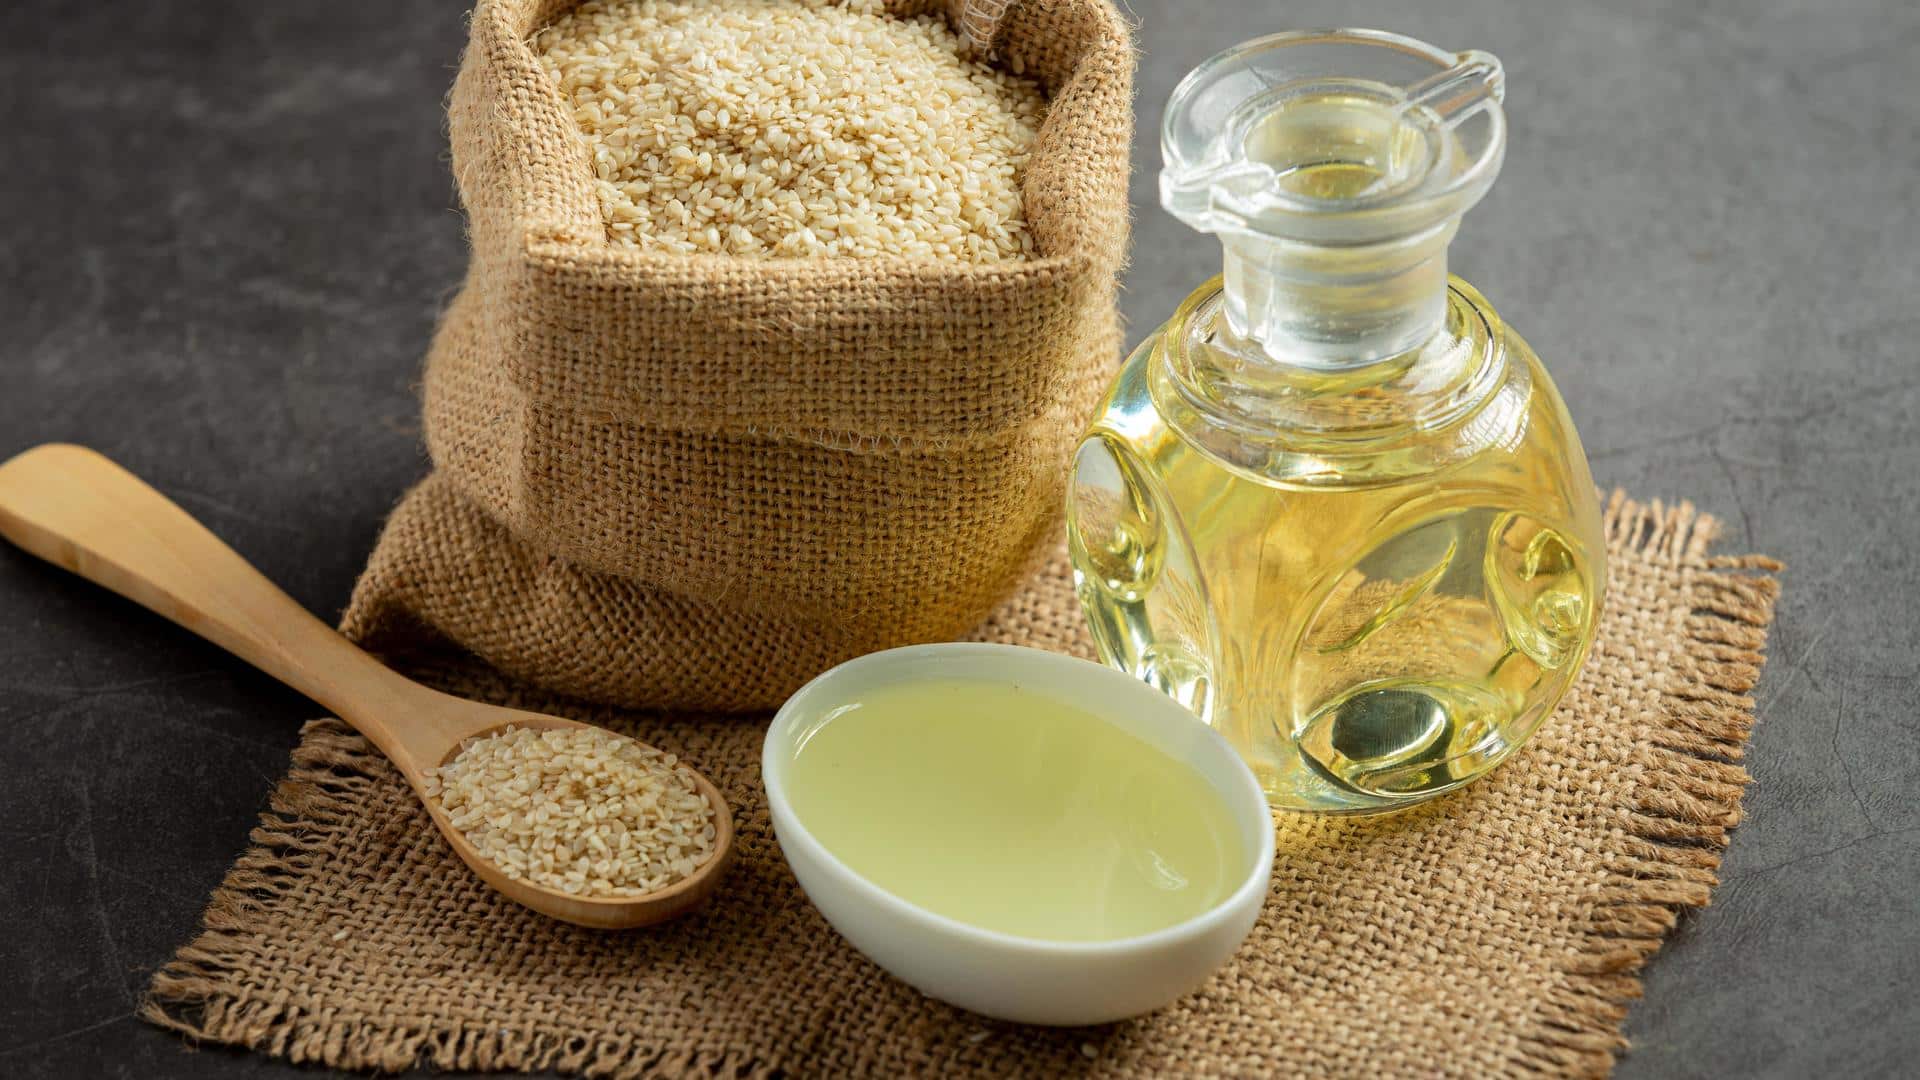 Wheat germ oil ensures good health: Here's how